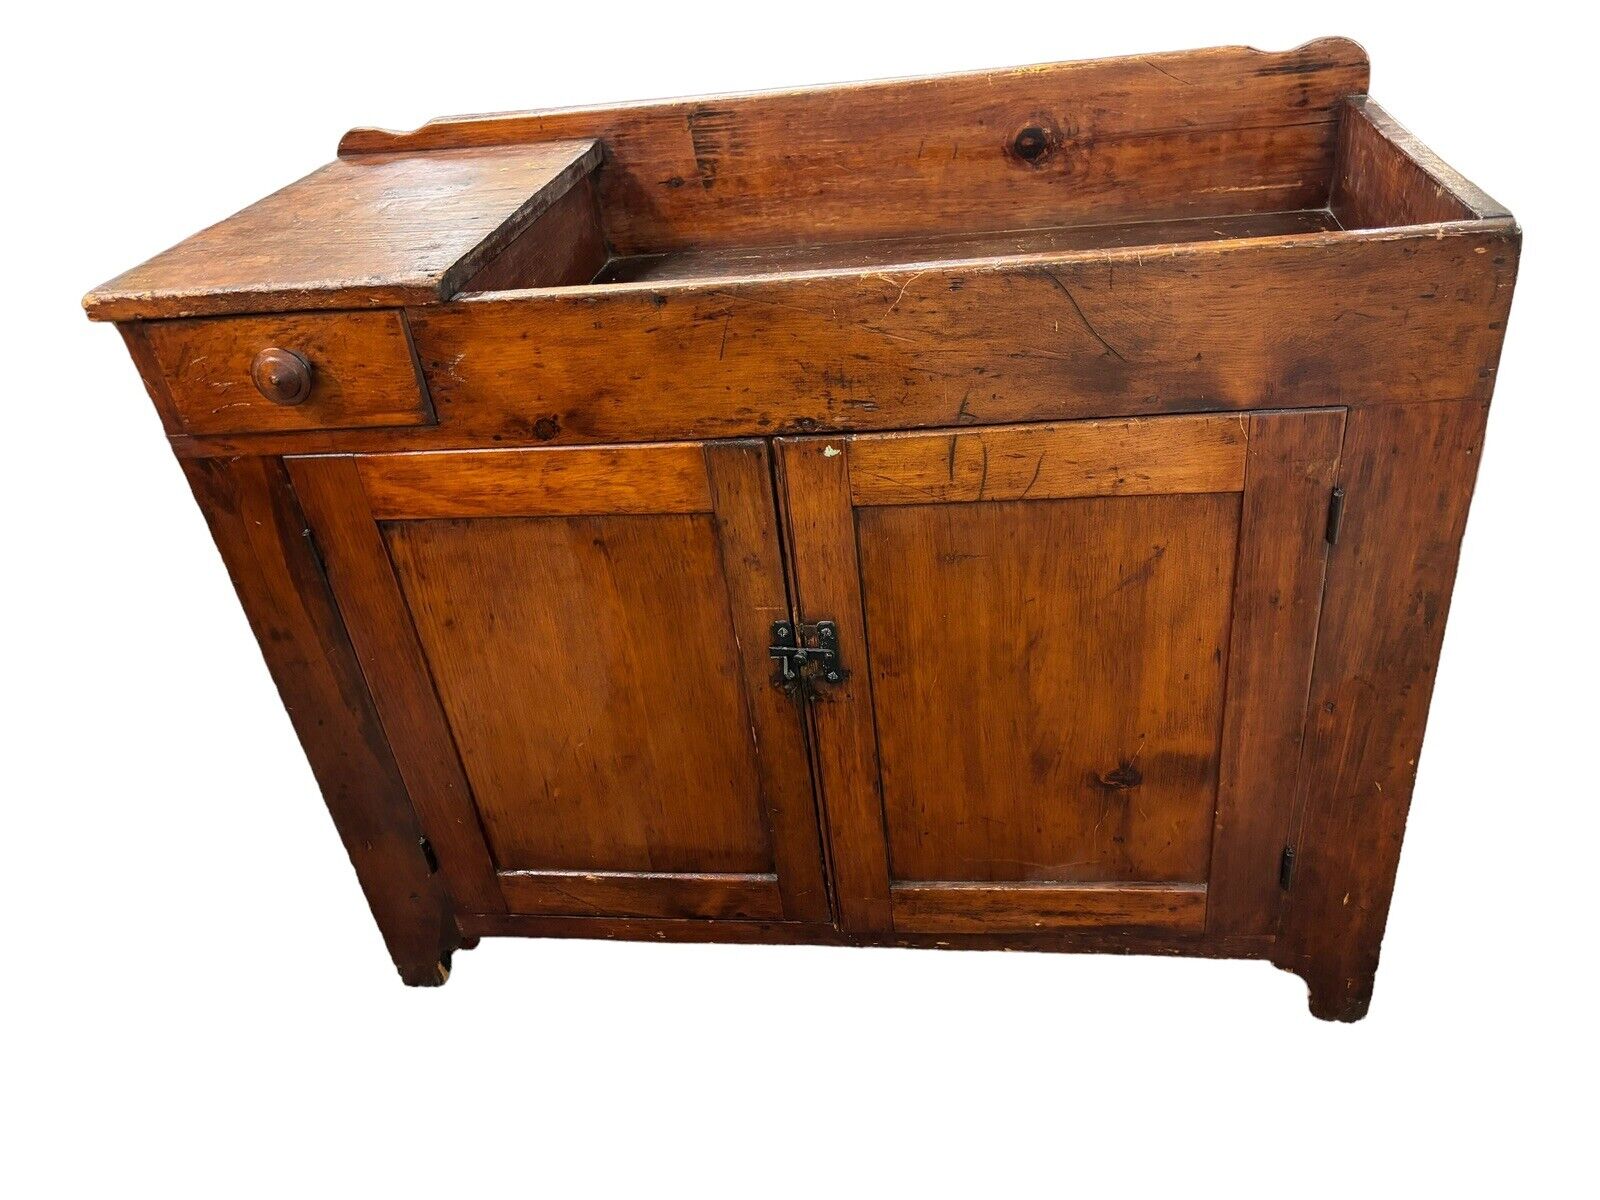 1800s Pennsylvania dry sink cabinet with drawer and Two Door Cupboard.